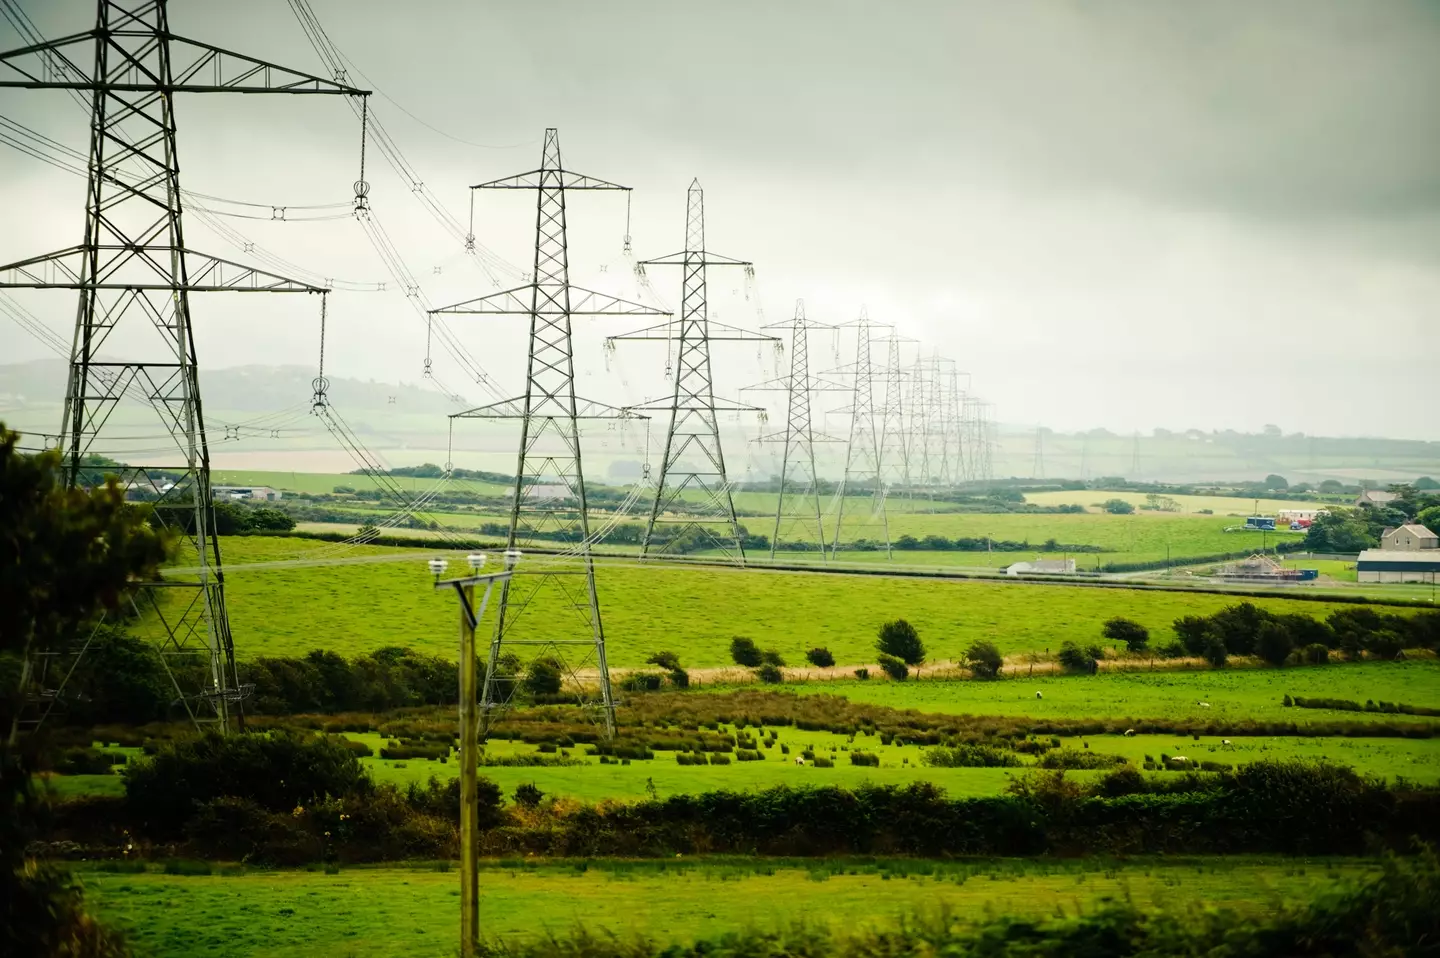 The plan could see households compensated to help National Grid avoid a blackout tomorrow evening.